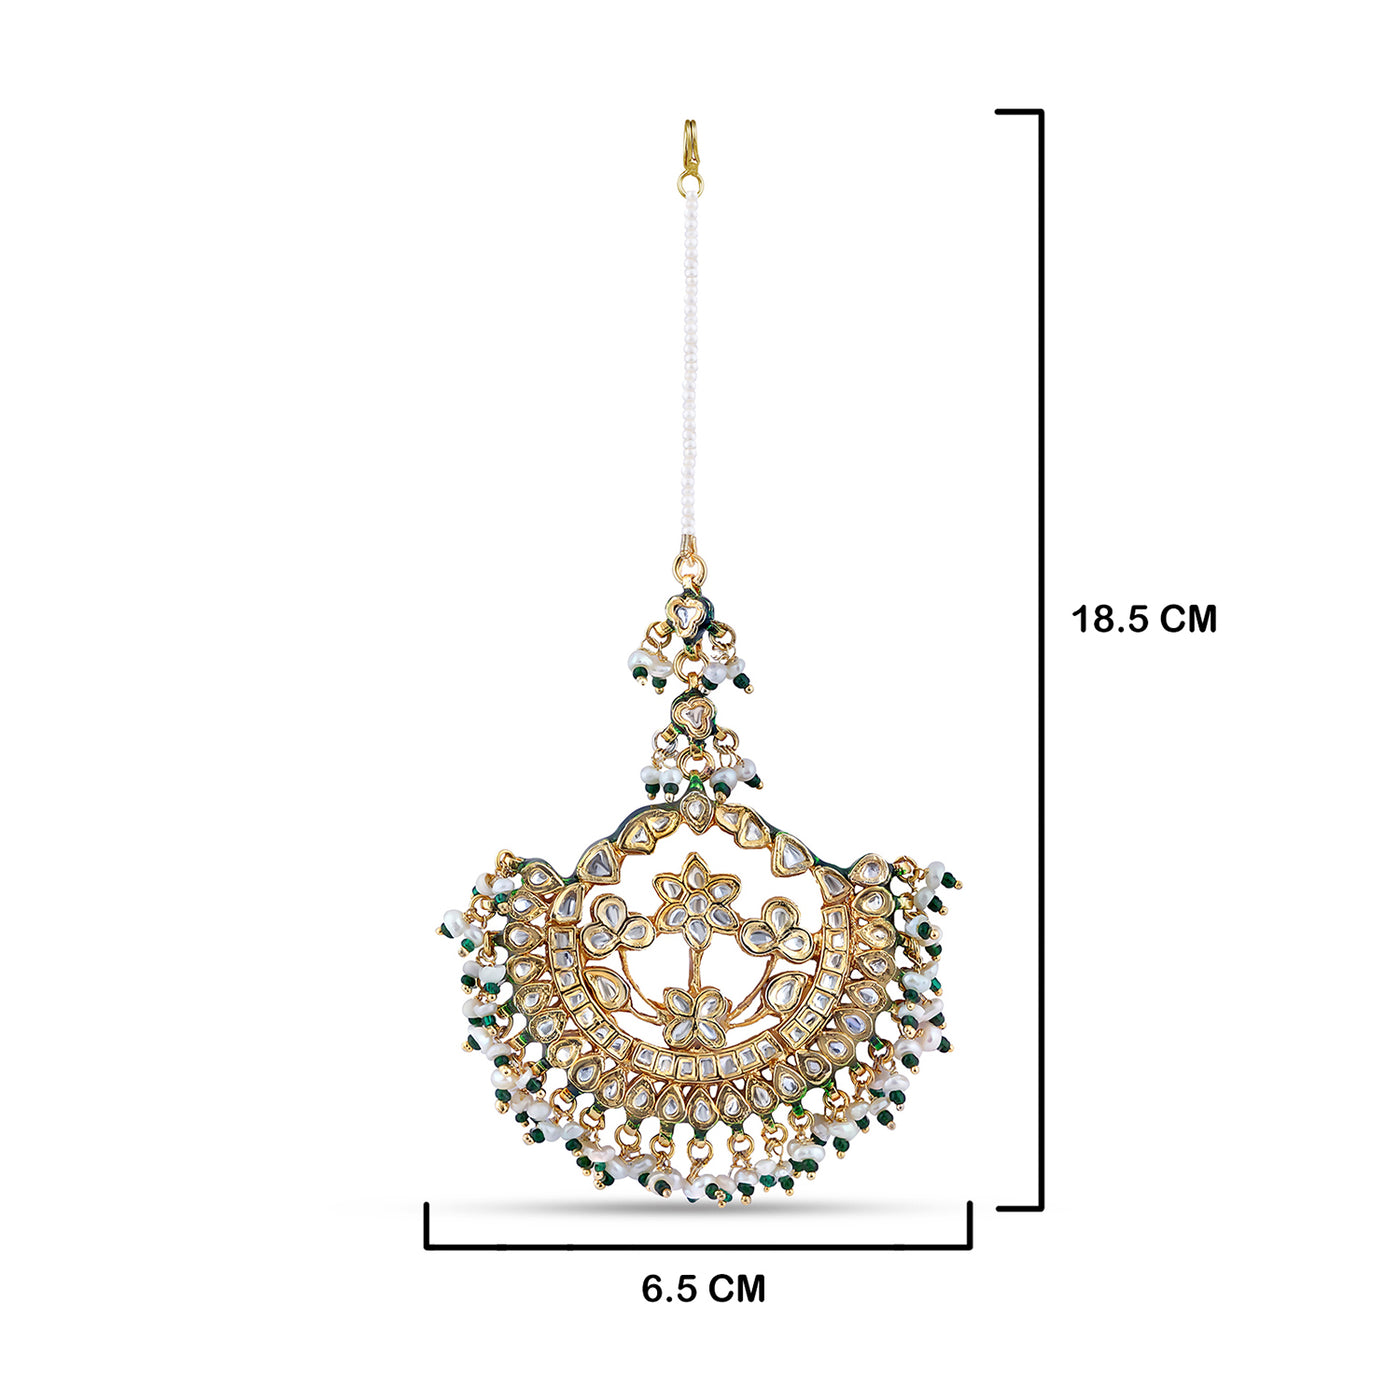 Multi Coloured Bead Maang Tikka with measurements in cm. 18.5 by 6.5cm.